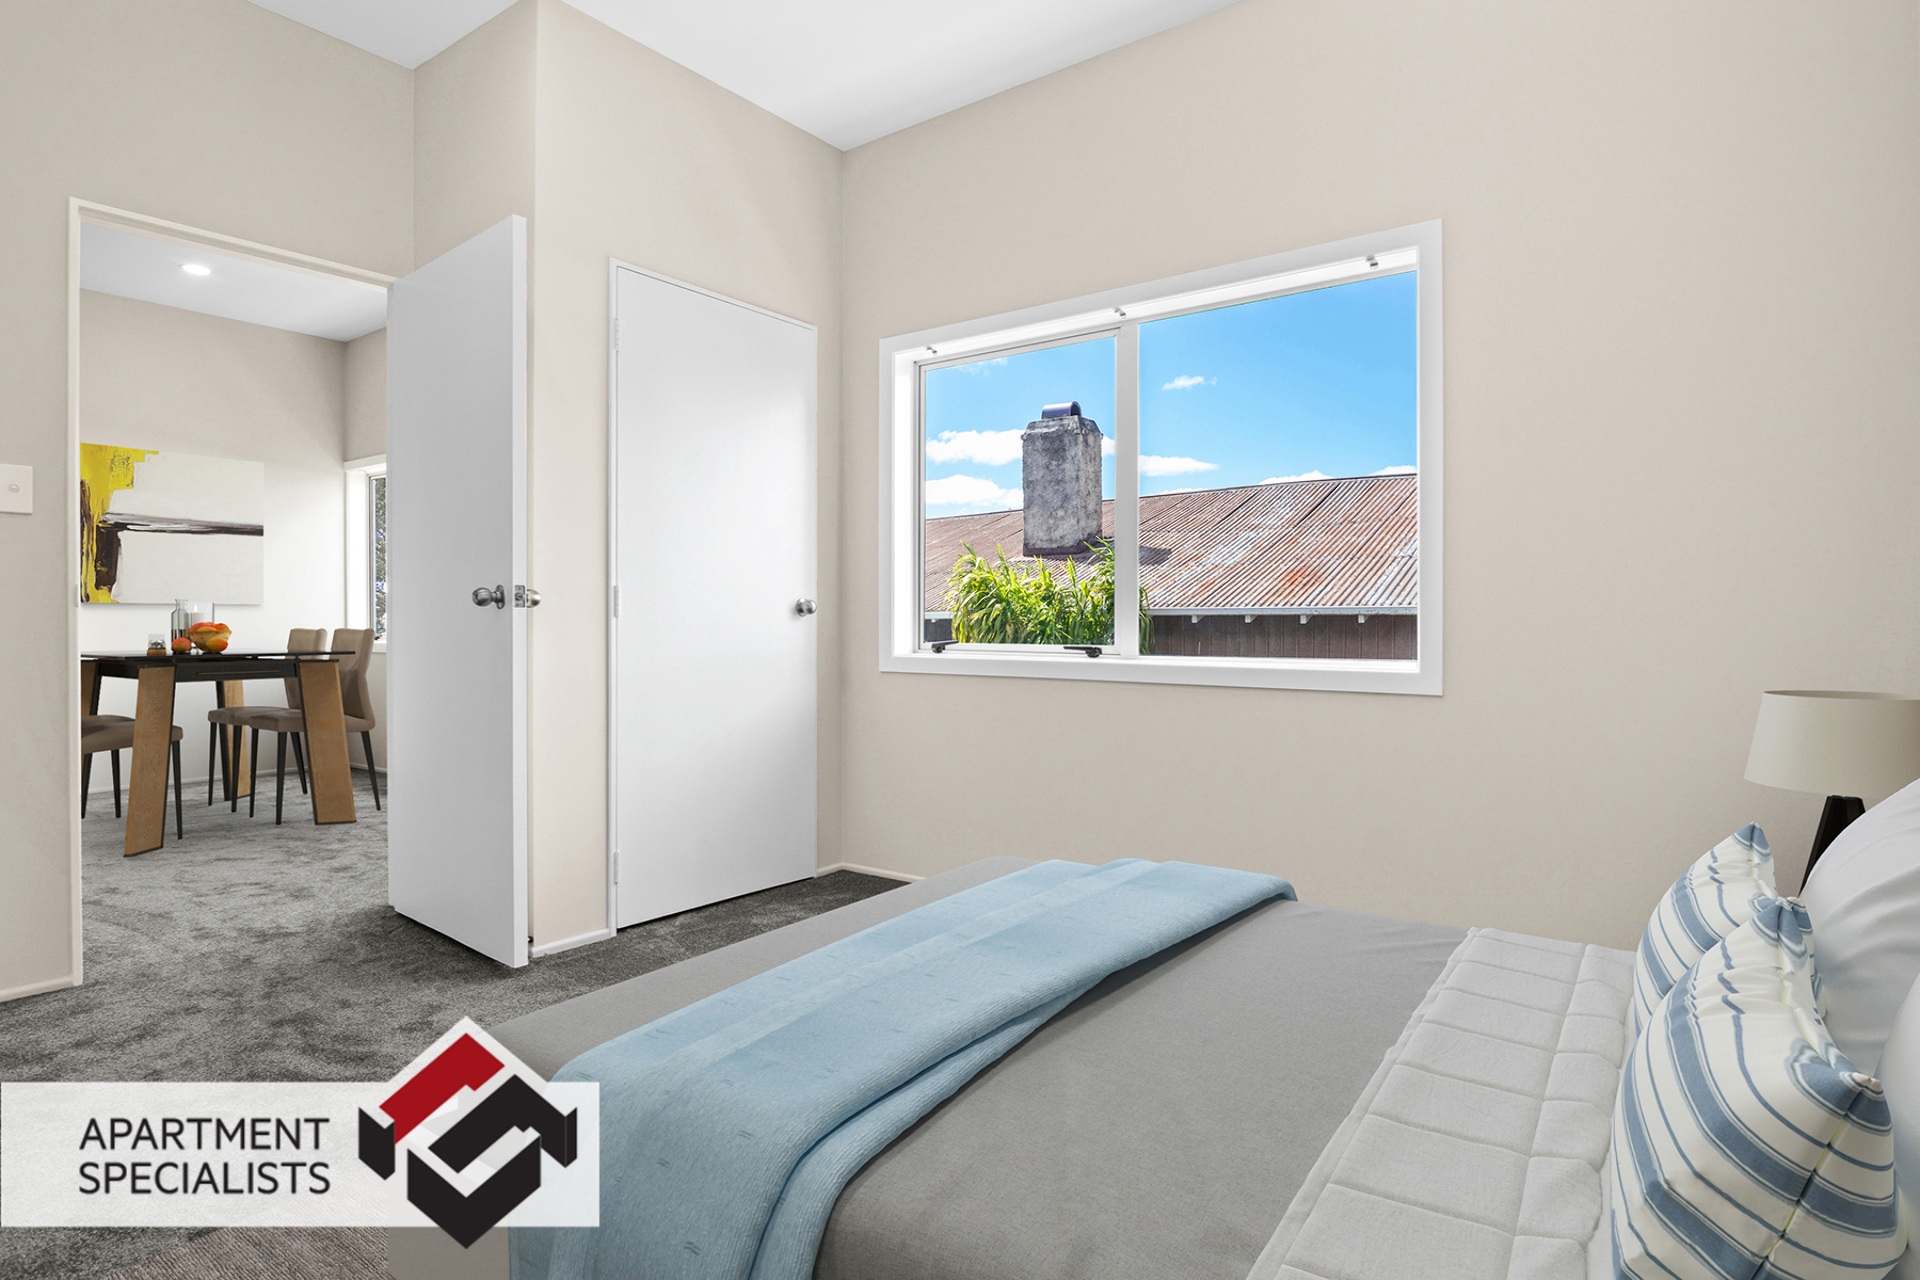 7 | 325 Mount Albert Road, Mount Roskill | Apartment Specialists